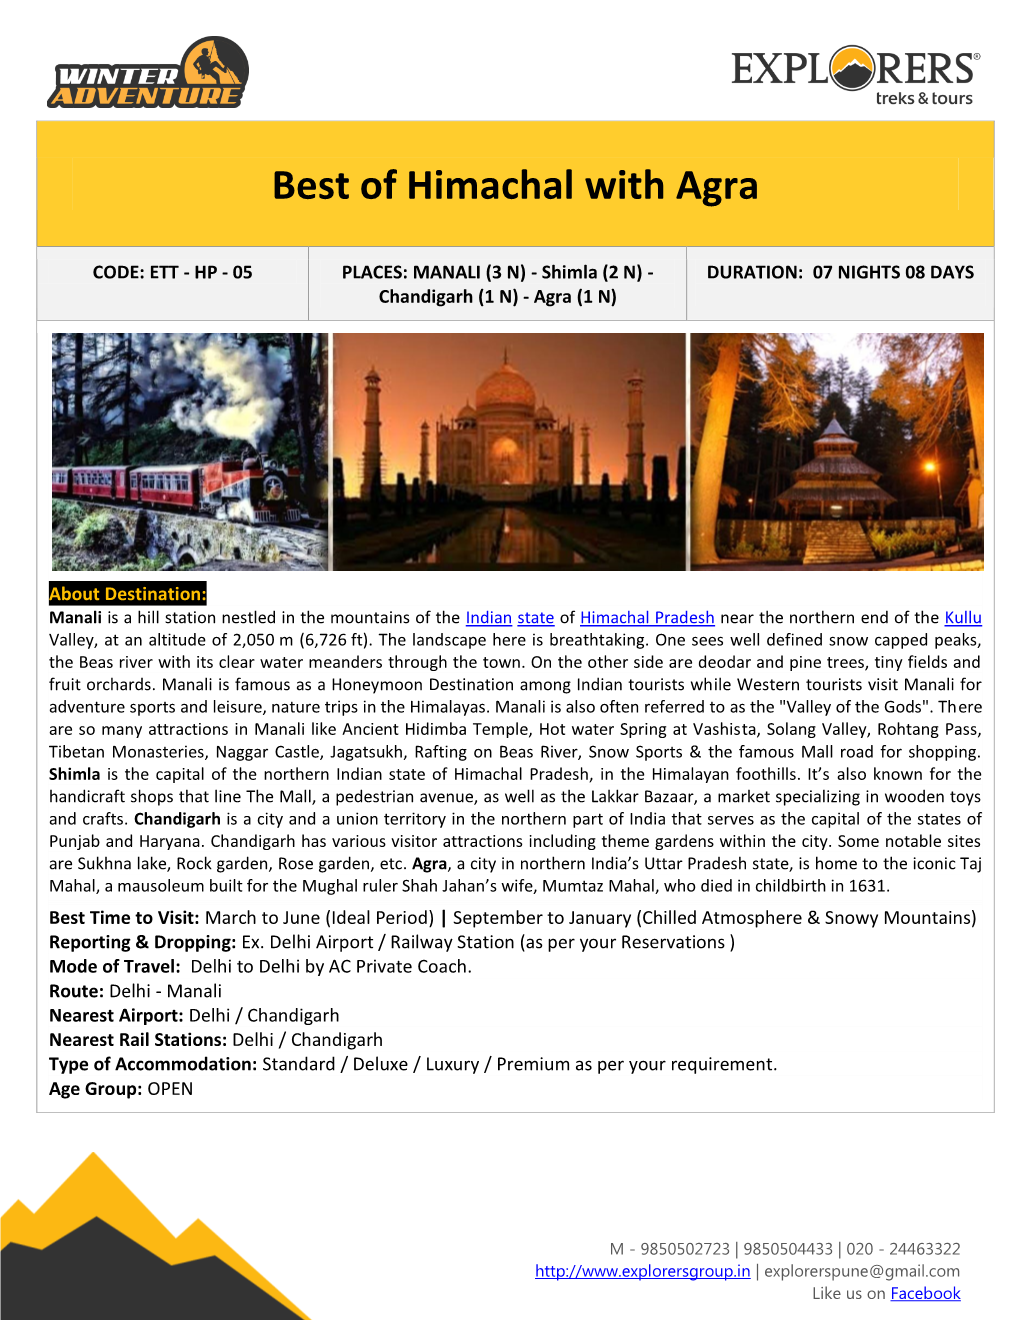 Best of Himachal with Agra